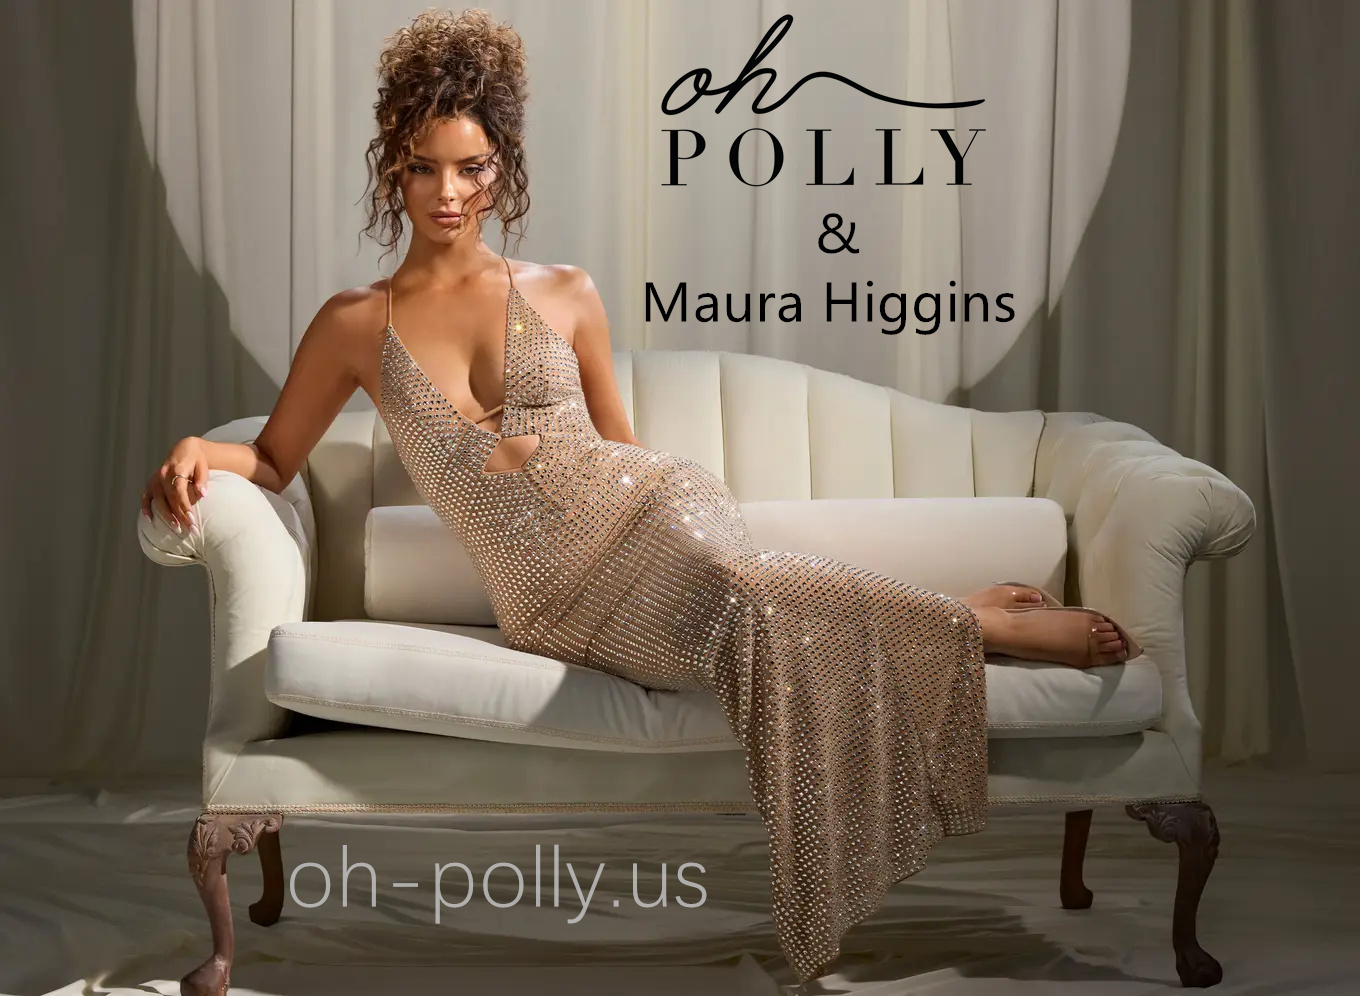 Discount Oh Polly hot new product! The joint series with Maura Higgins makes a stunning debut!